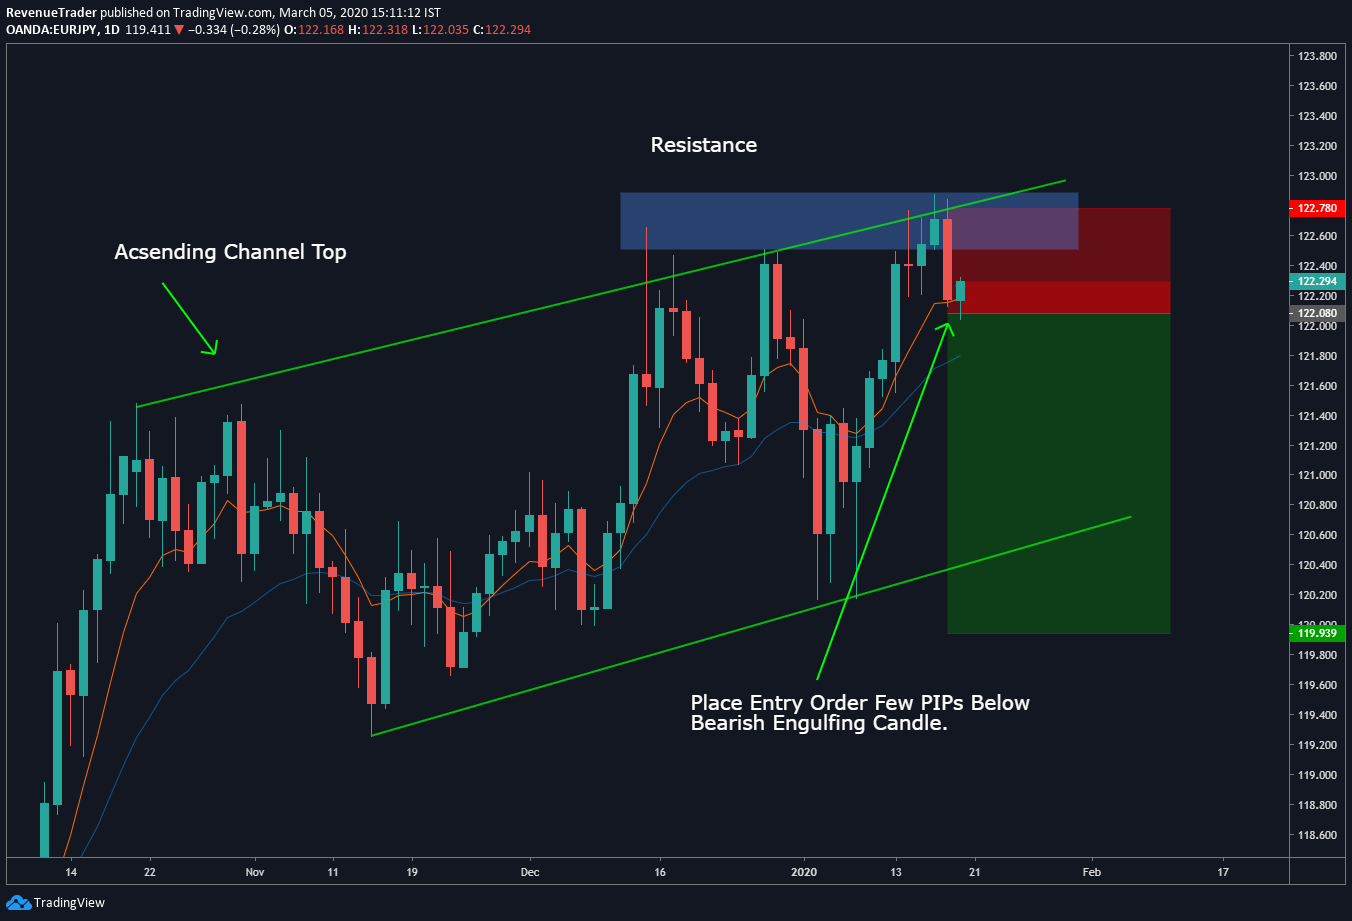 Bearish engulfing price action patter at both resistance and channel top